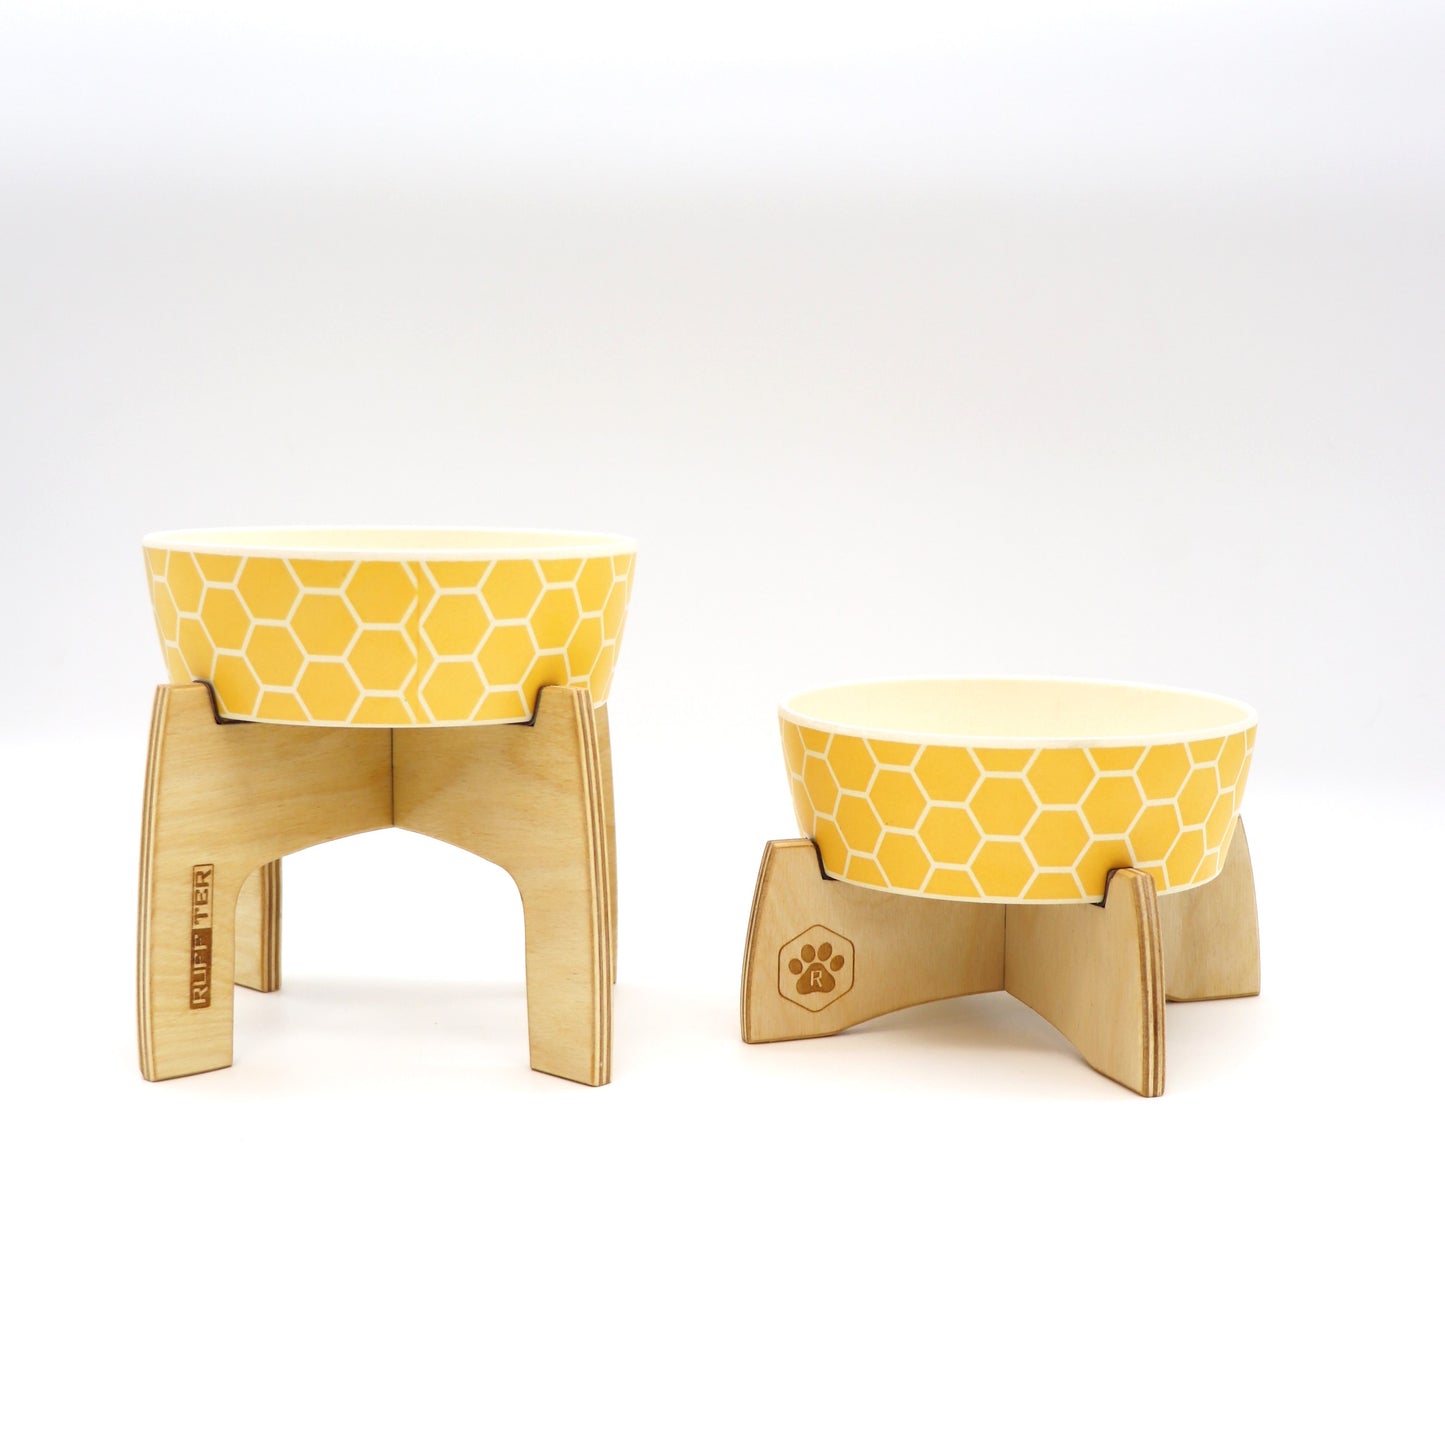 Single Bowl Stand - Bamboo Bowl - Honeycomb BECO